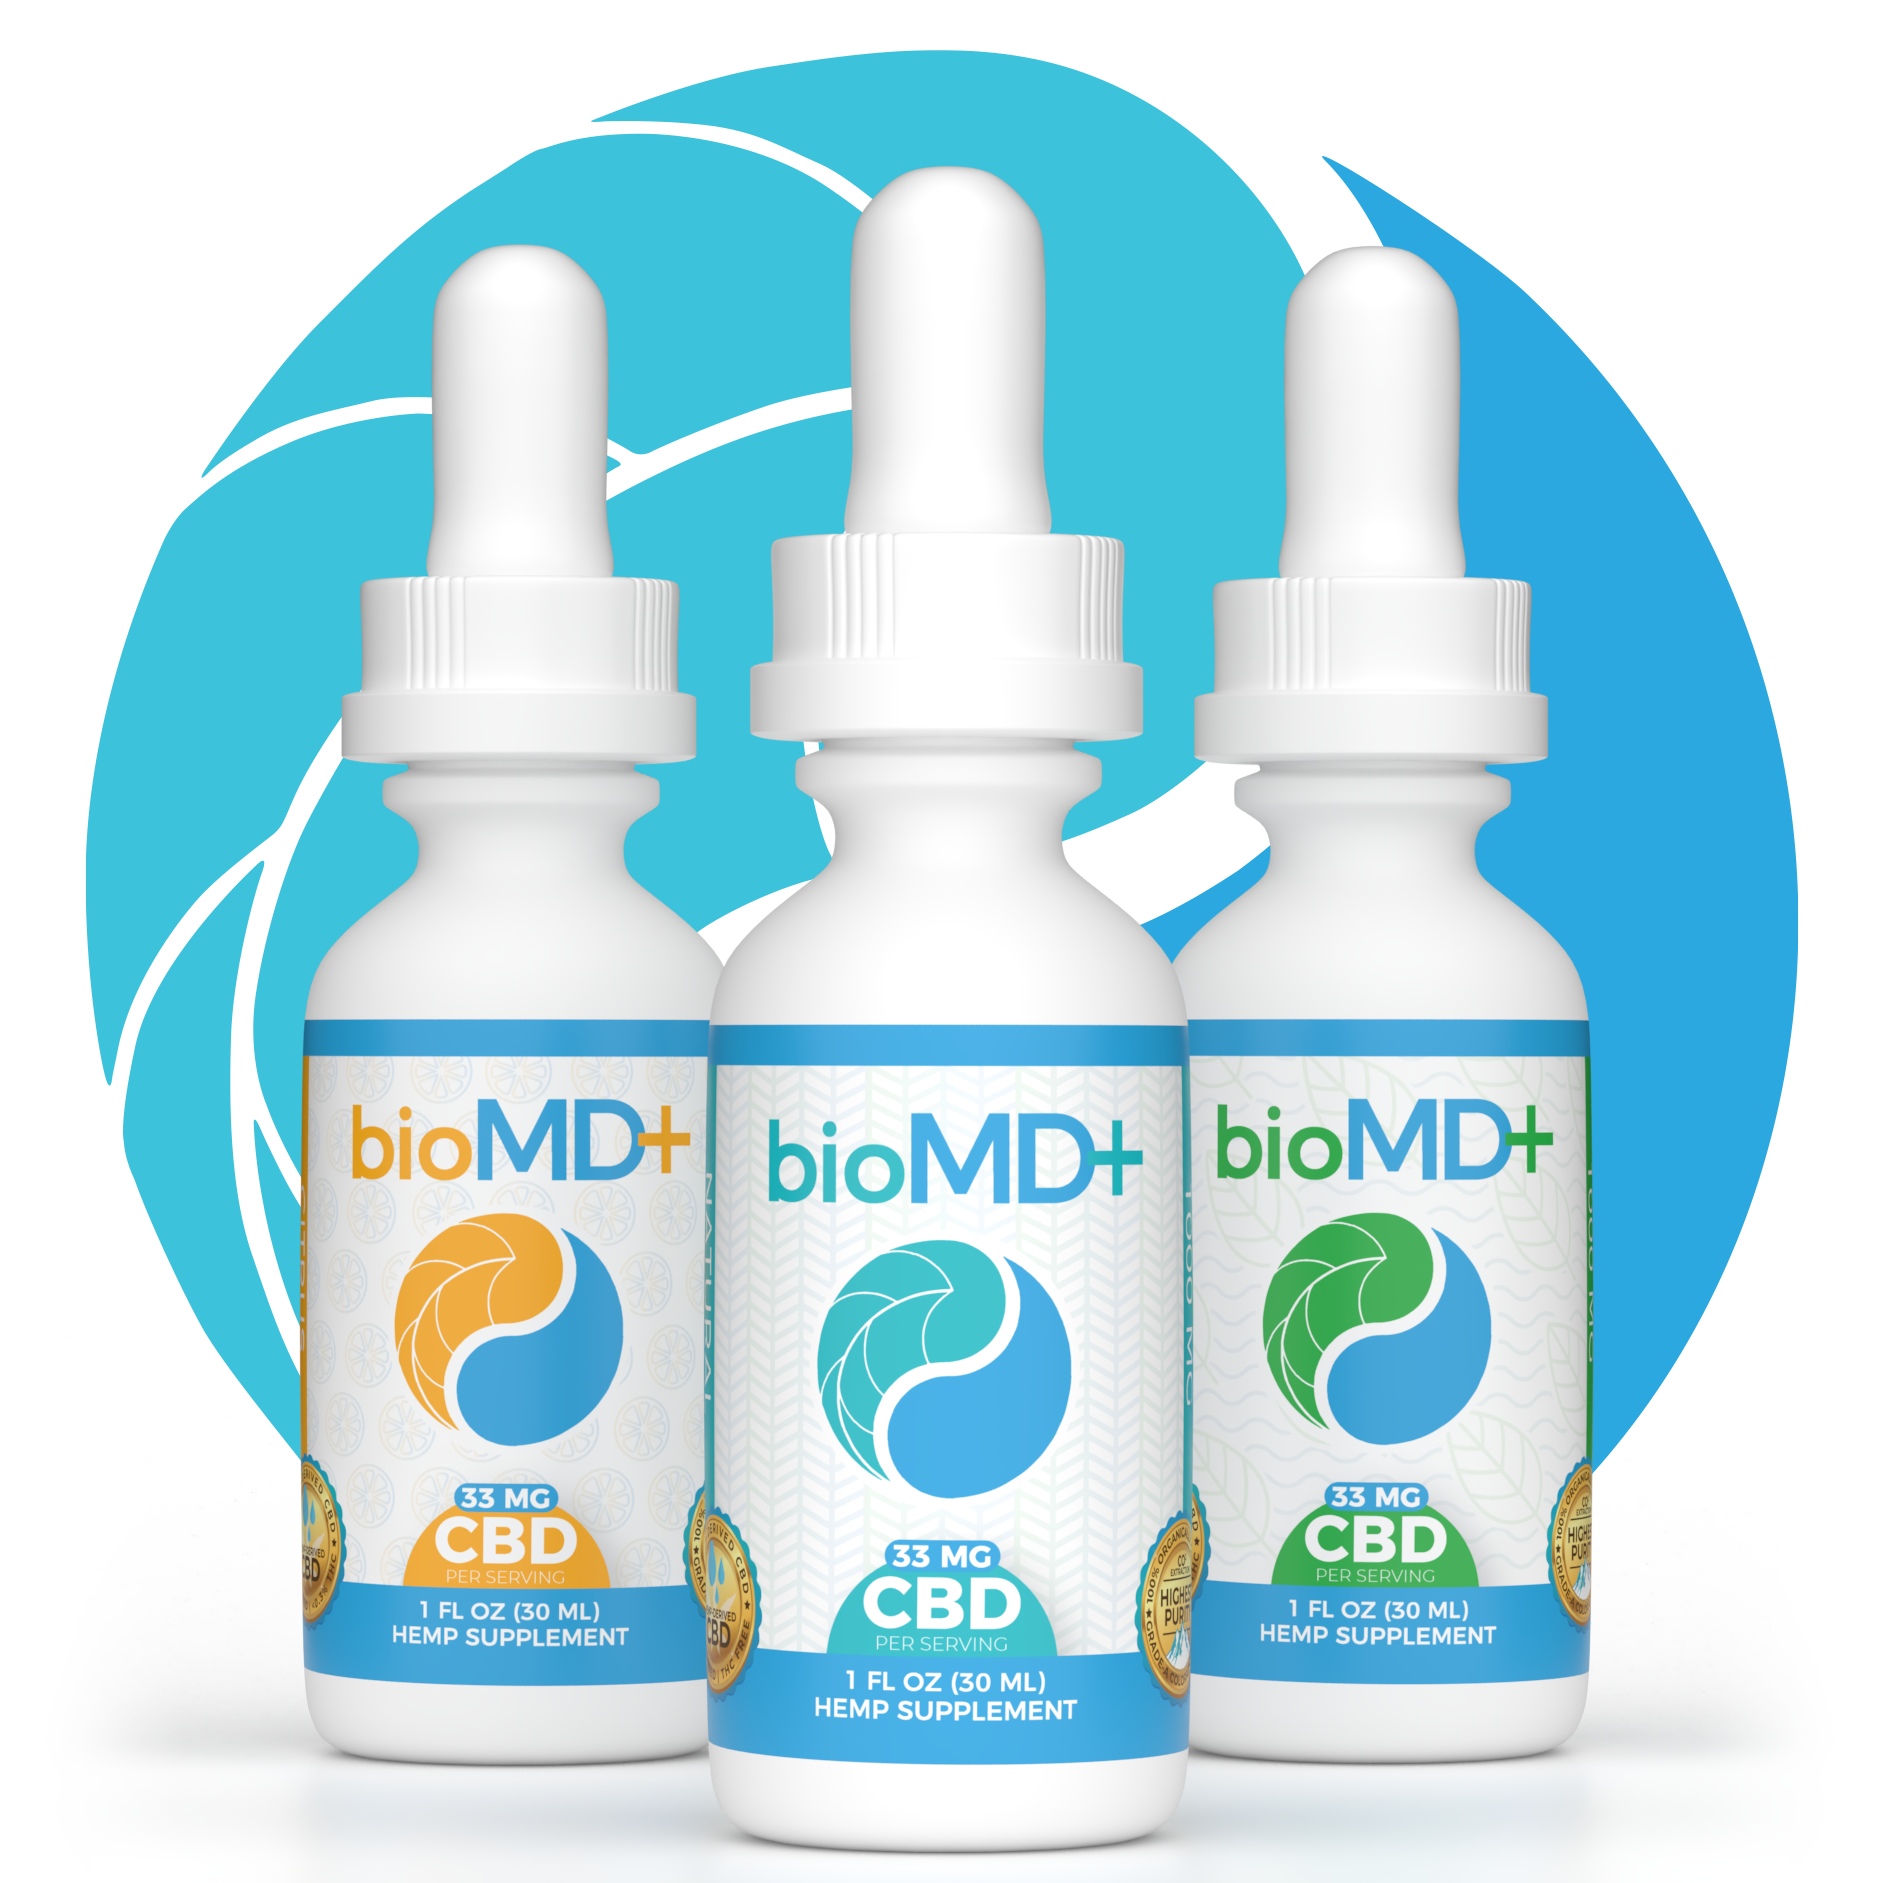 CBD Oil for Sale - Pure CBD Products - Third-Party Lab Tested CBD - bioMD+